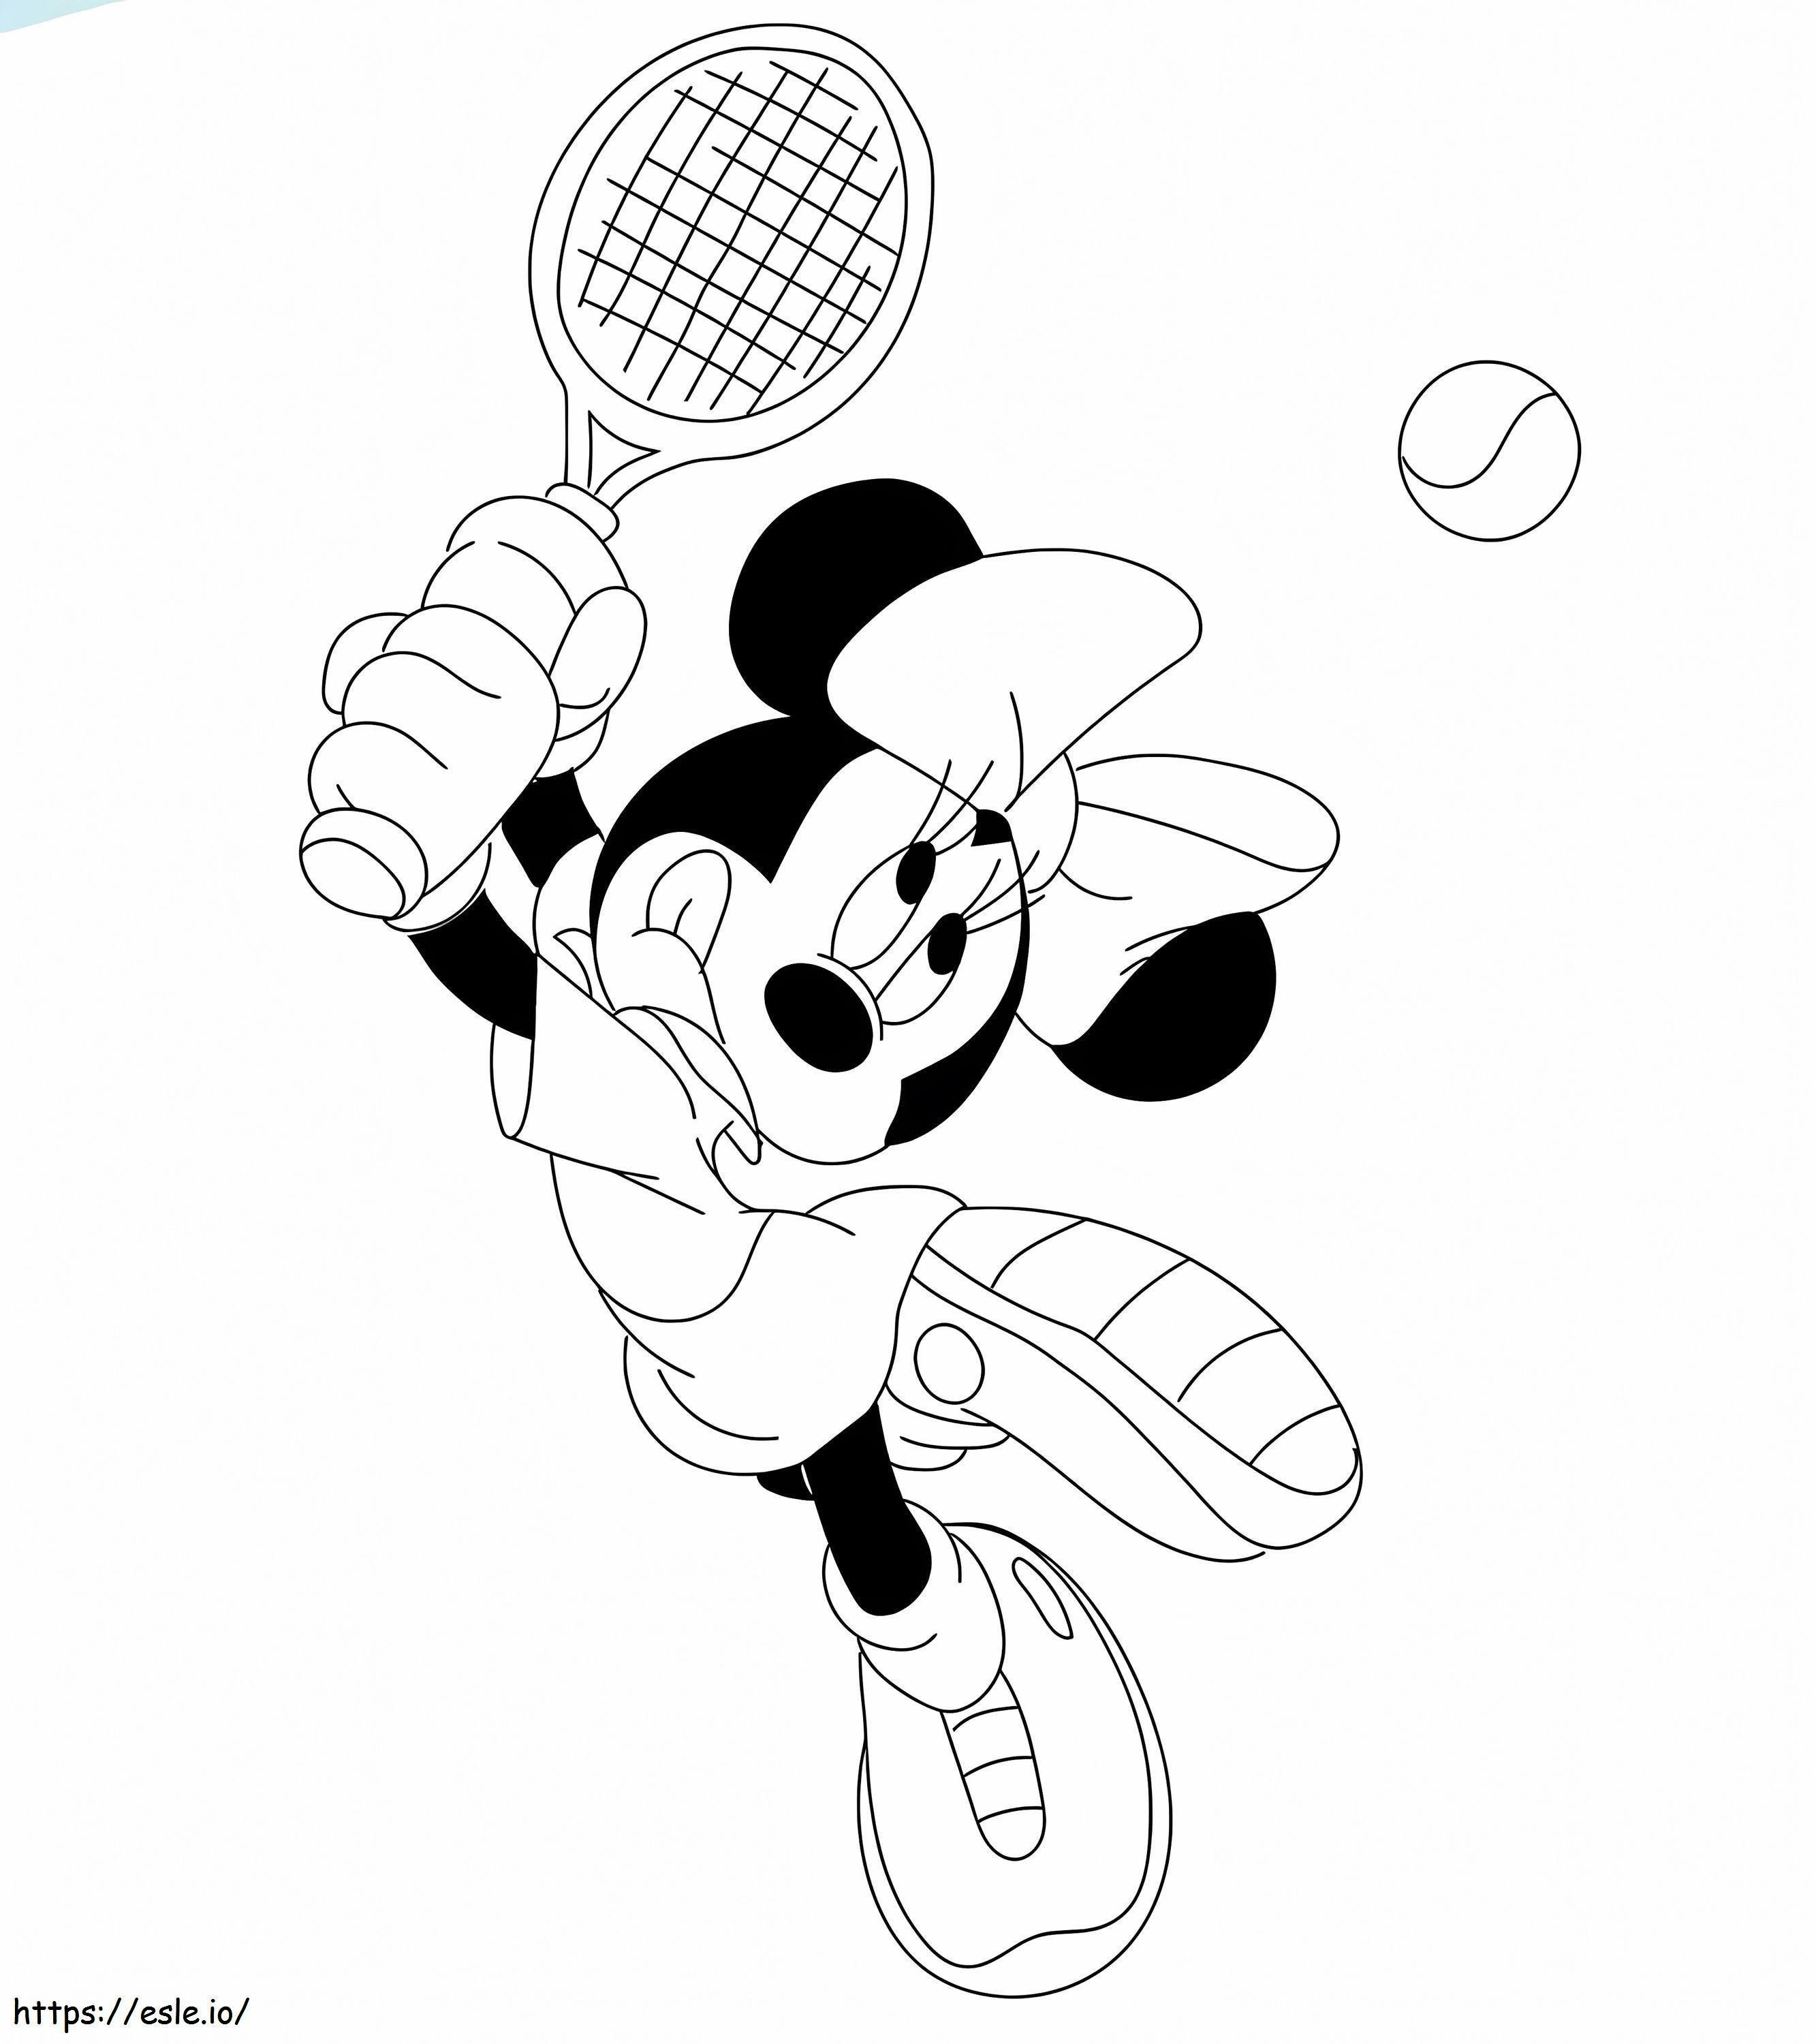 Minnie Mouse Playing Tennis coloring page